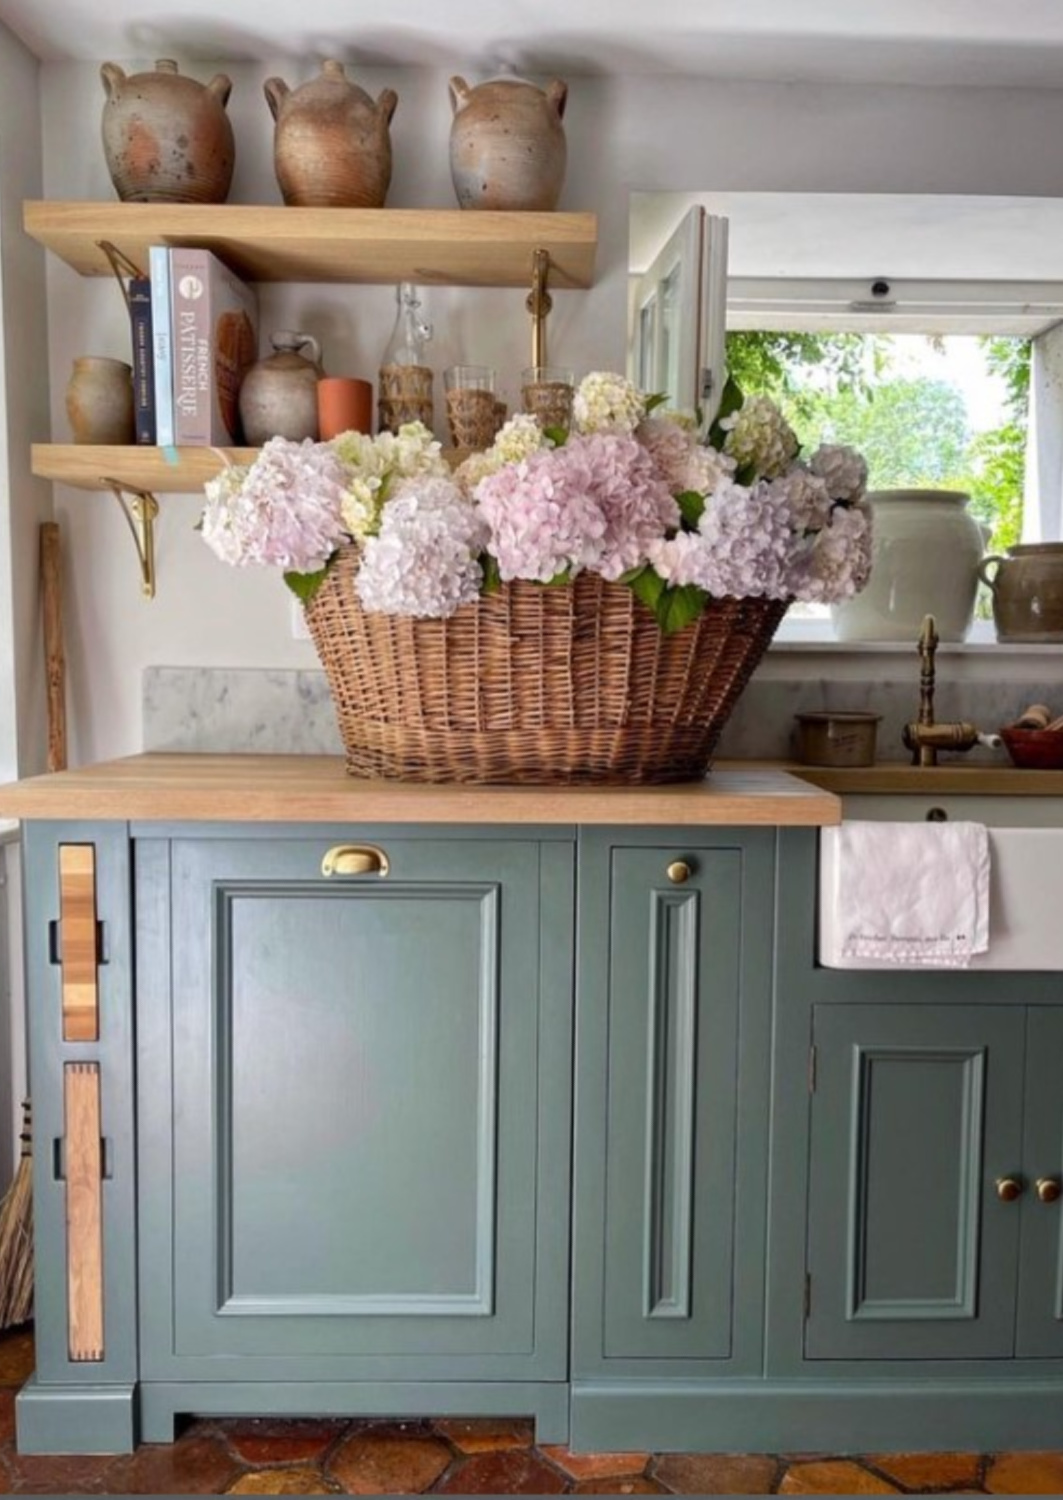 French farmhouse kitchen in France with green cabinets (Farrow & Ball Green Smoke), butcher block counters, and basket of pink hydrangea - Vivi et Margot. #vivietmargot #frenchfarmhouse #greenkitchens